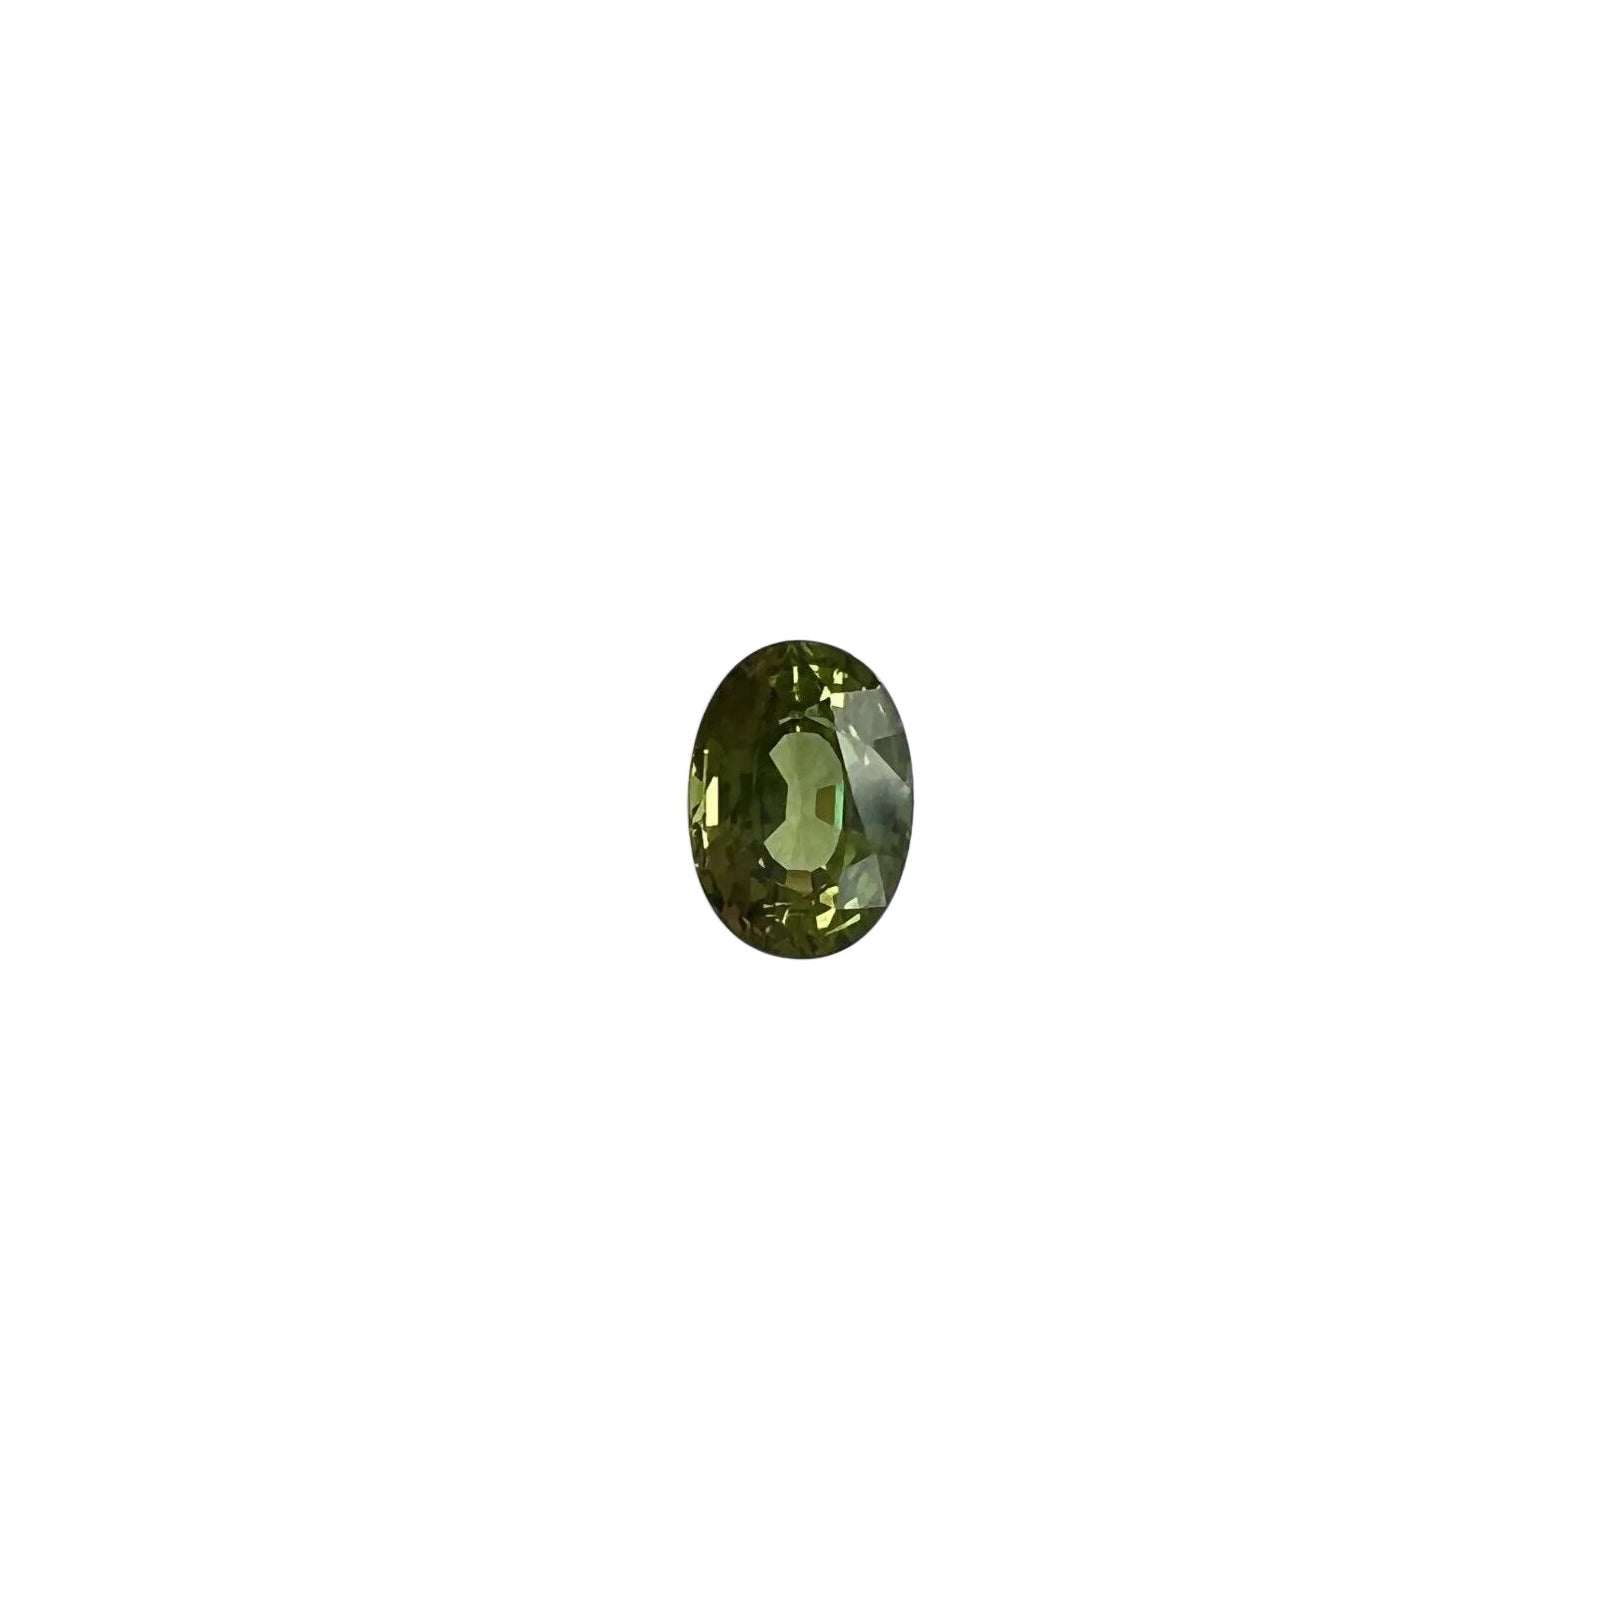 1.05ct Vivid Green Oval Cut Sapphire Untreated Rare IGI Certified Blister For Sale